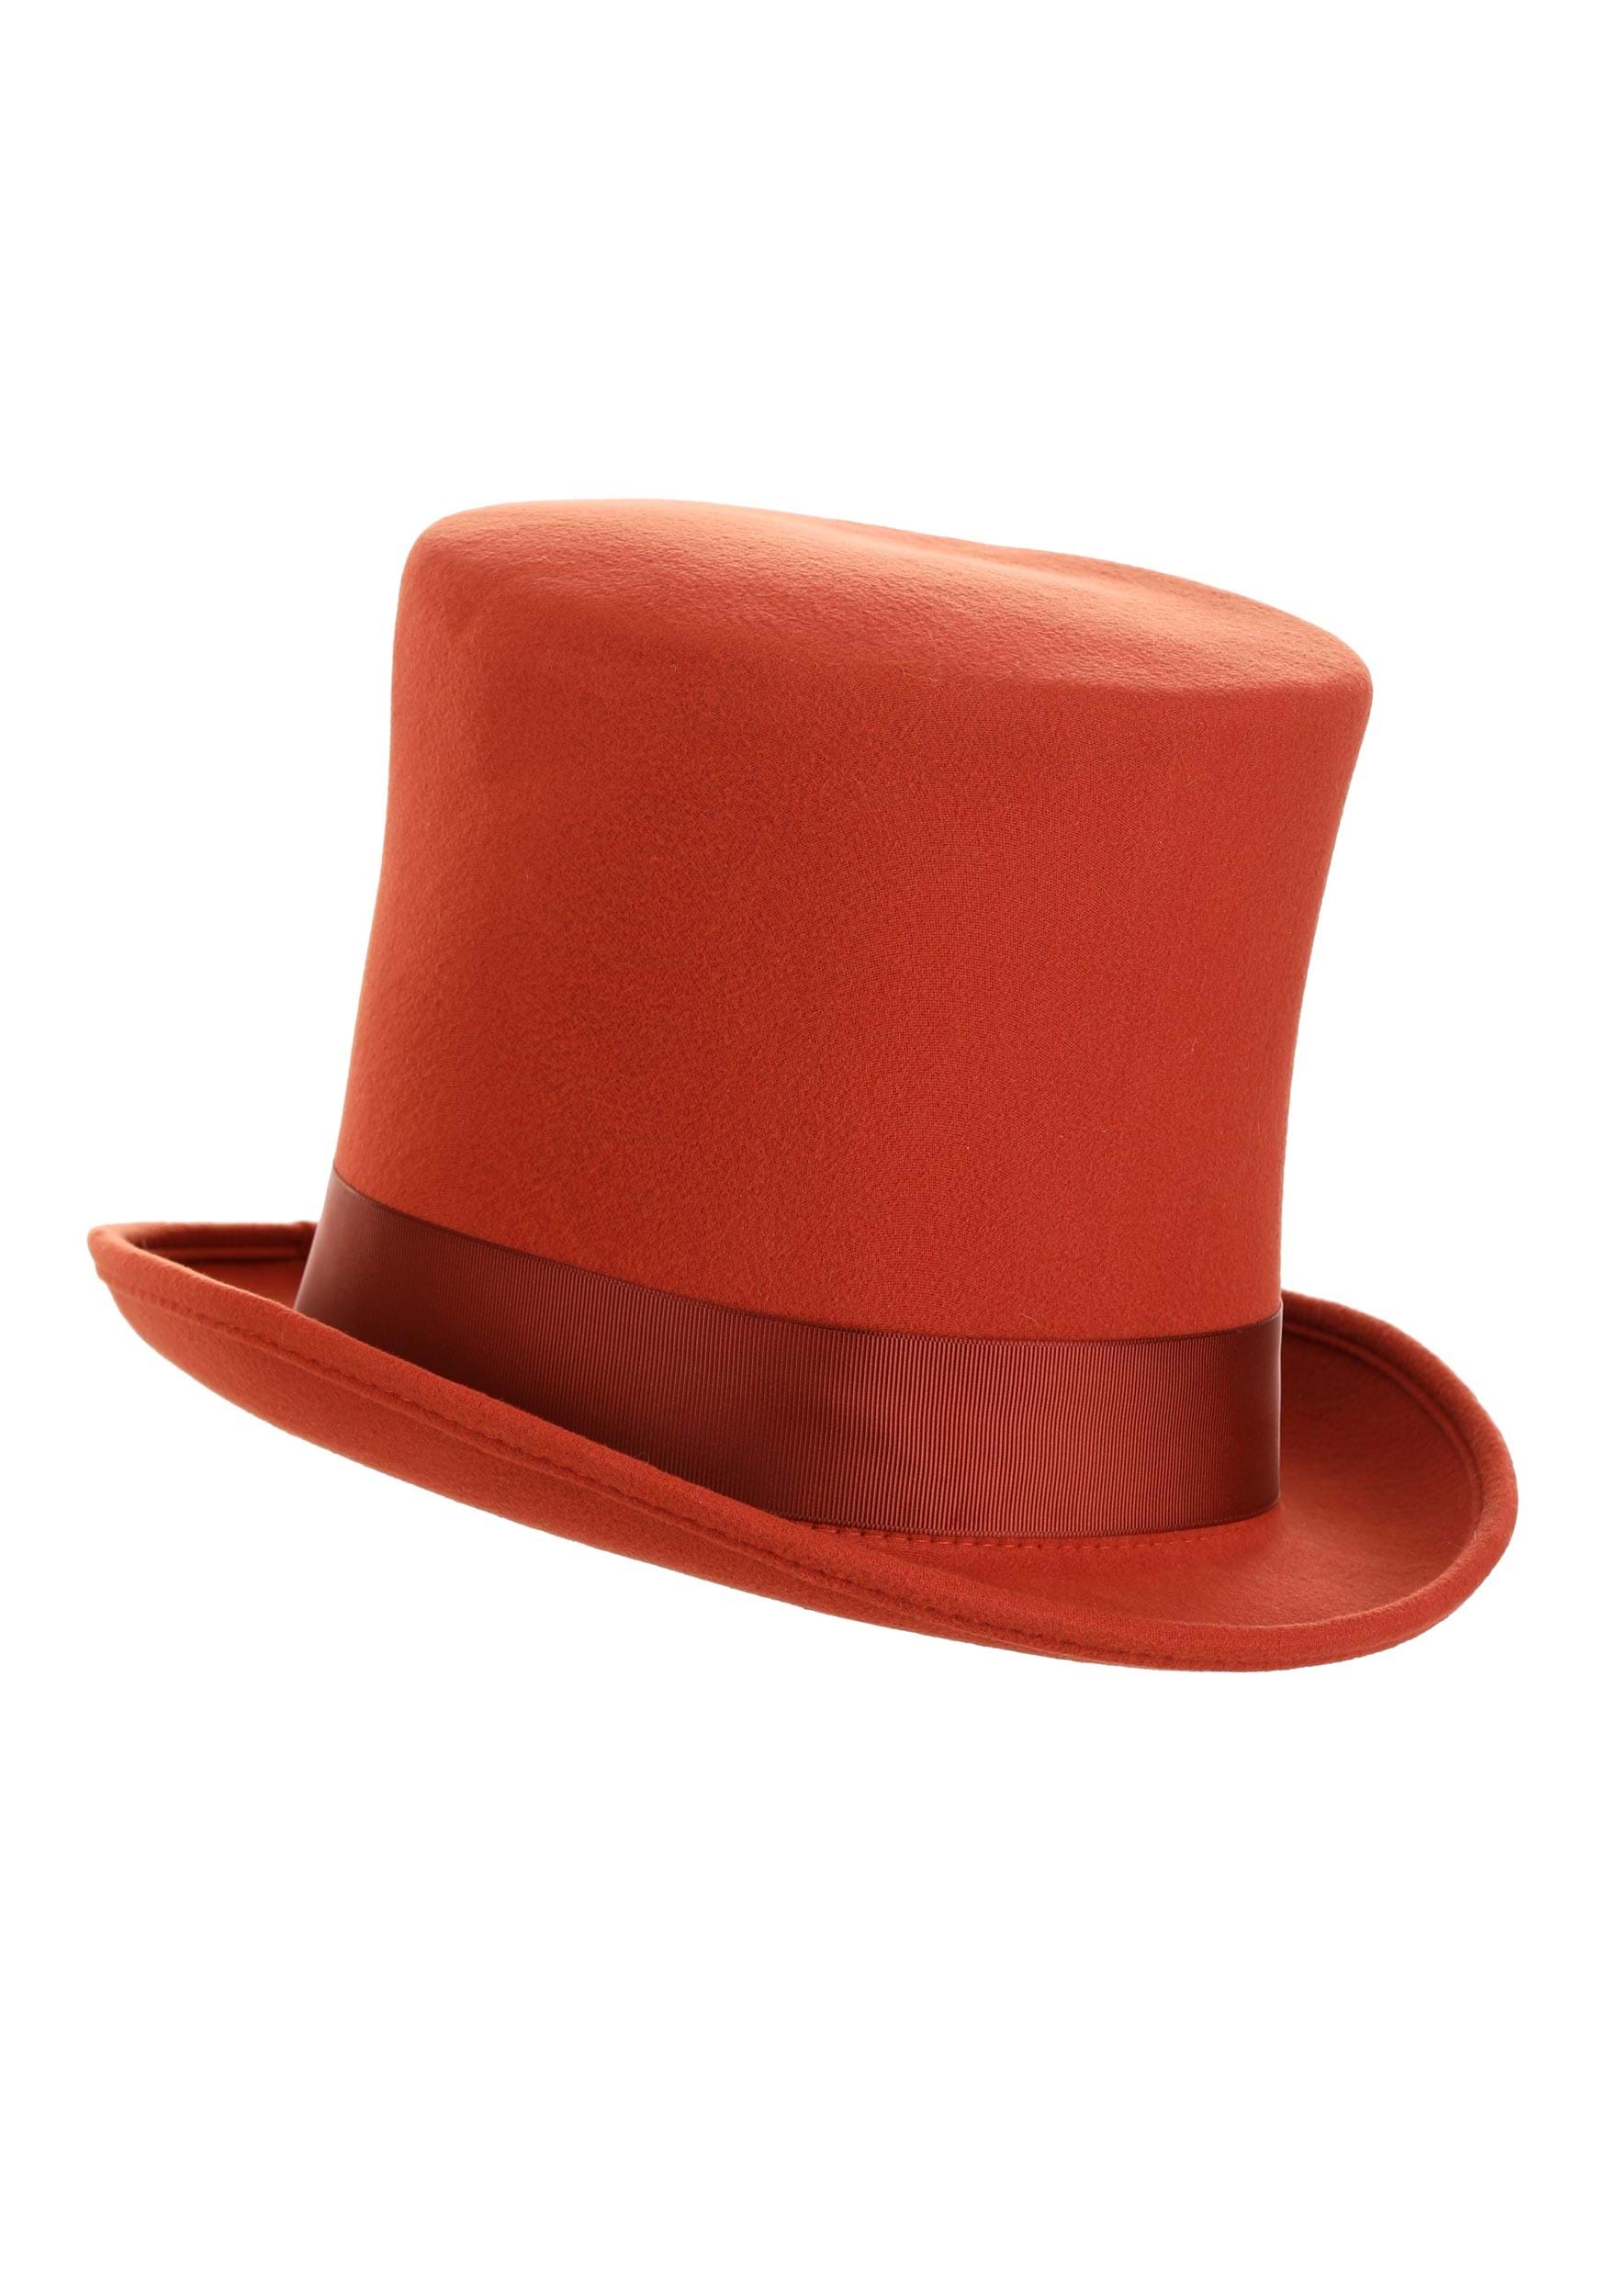 Authentic Willy Wonka Fancy Dress Costume Hat For Men , Fancy Dress Costume Hats